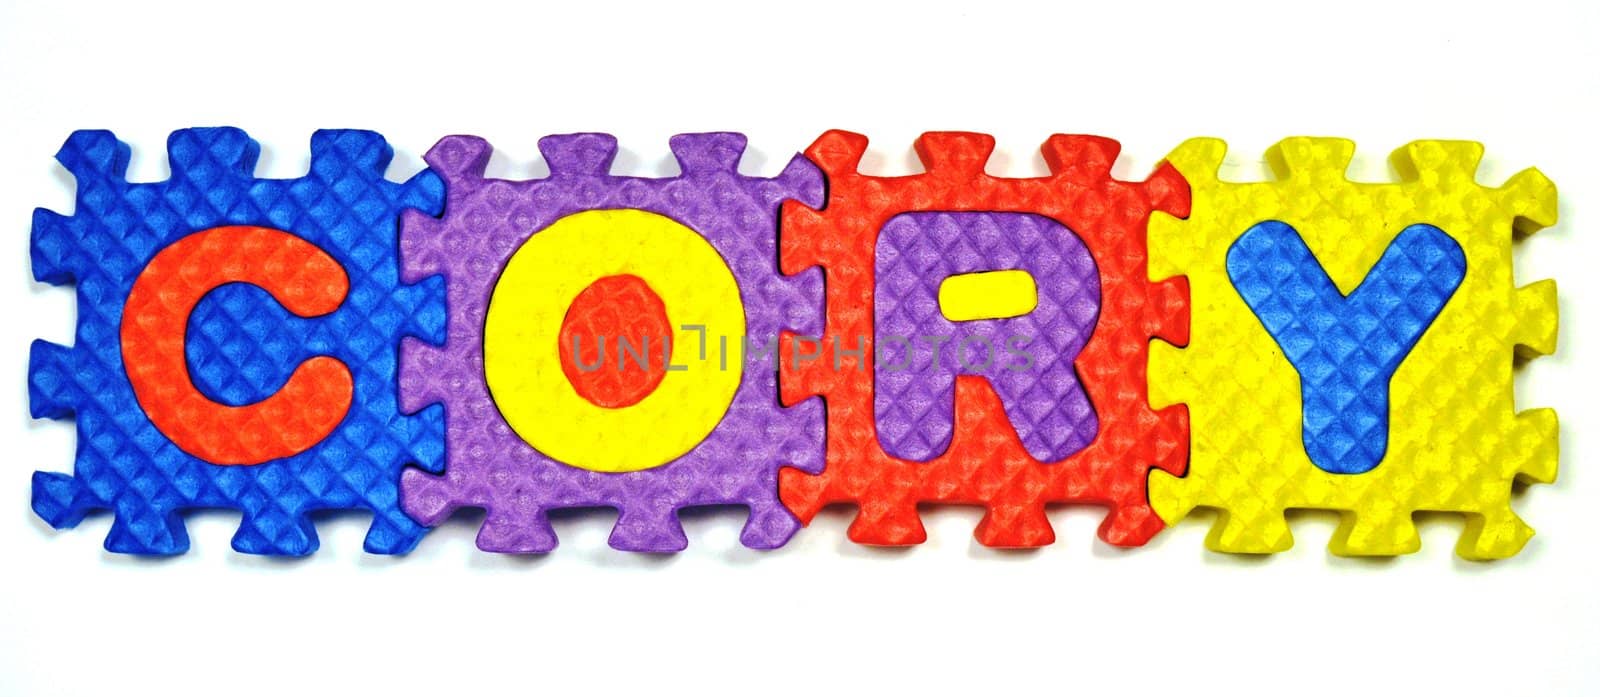 Connected Letters - CORY in center by RefocusPhoto